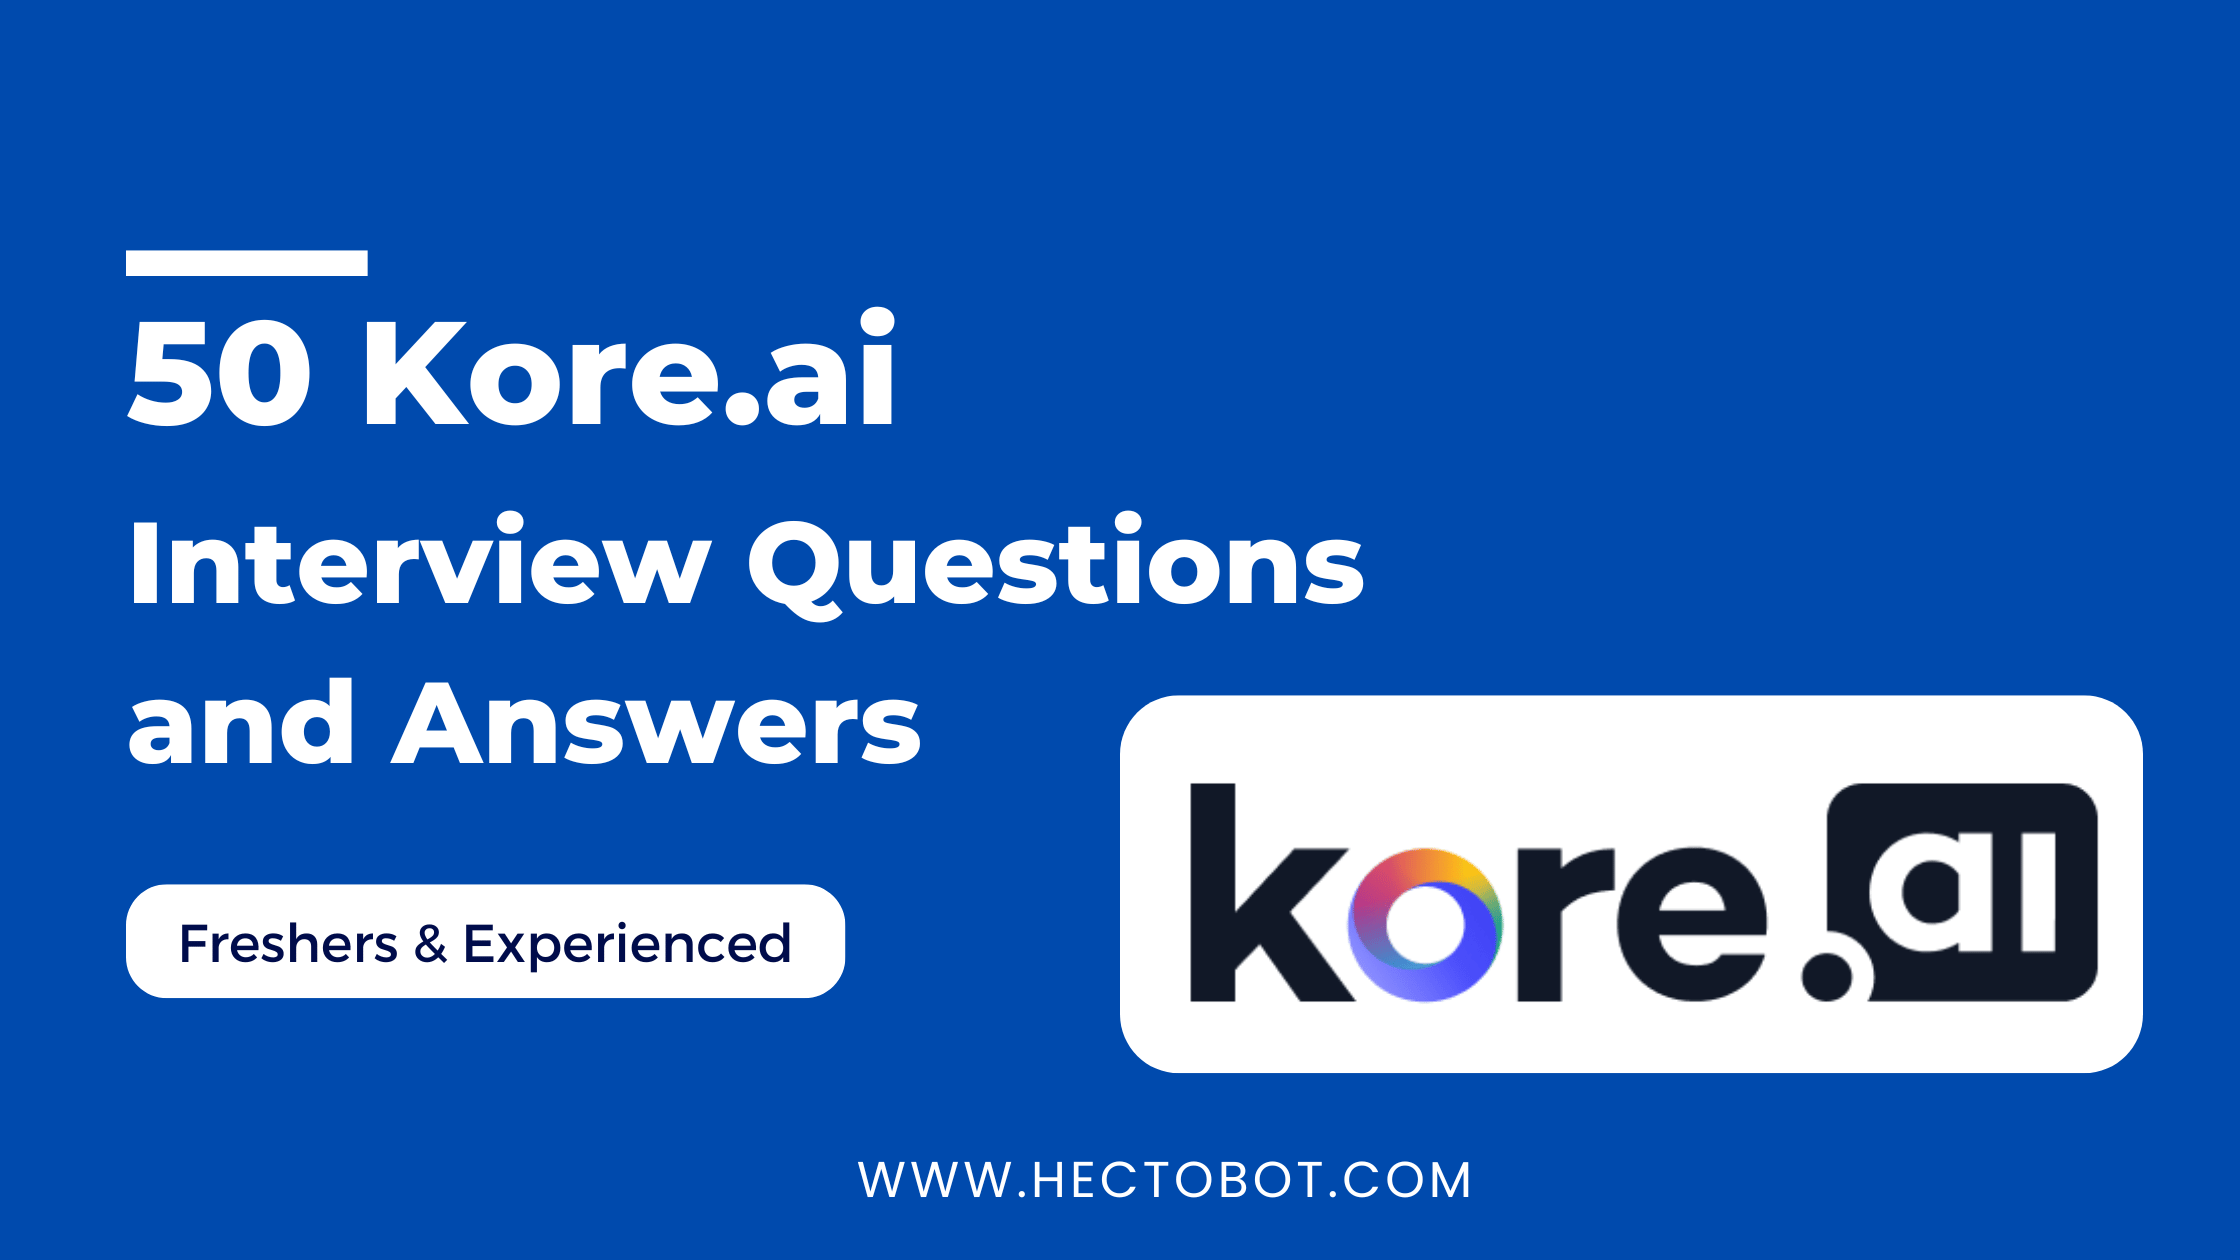 50 kore.ai Interview Questions and Answers on Chatbot